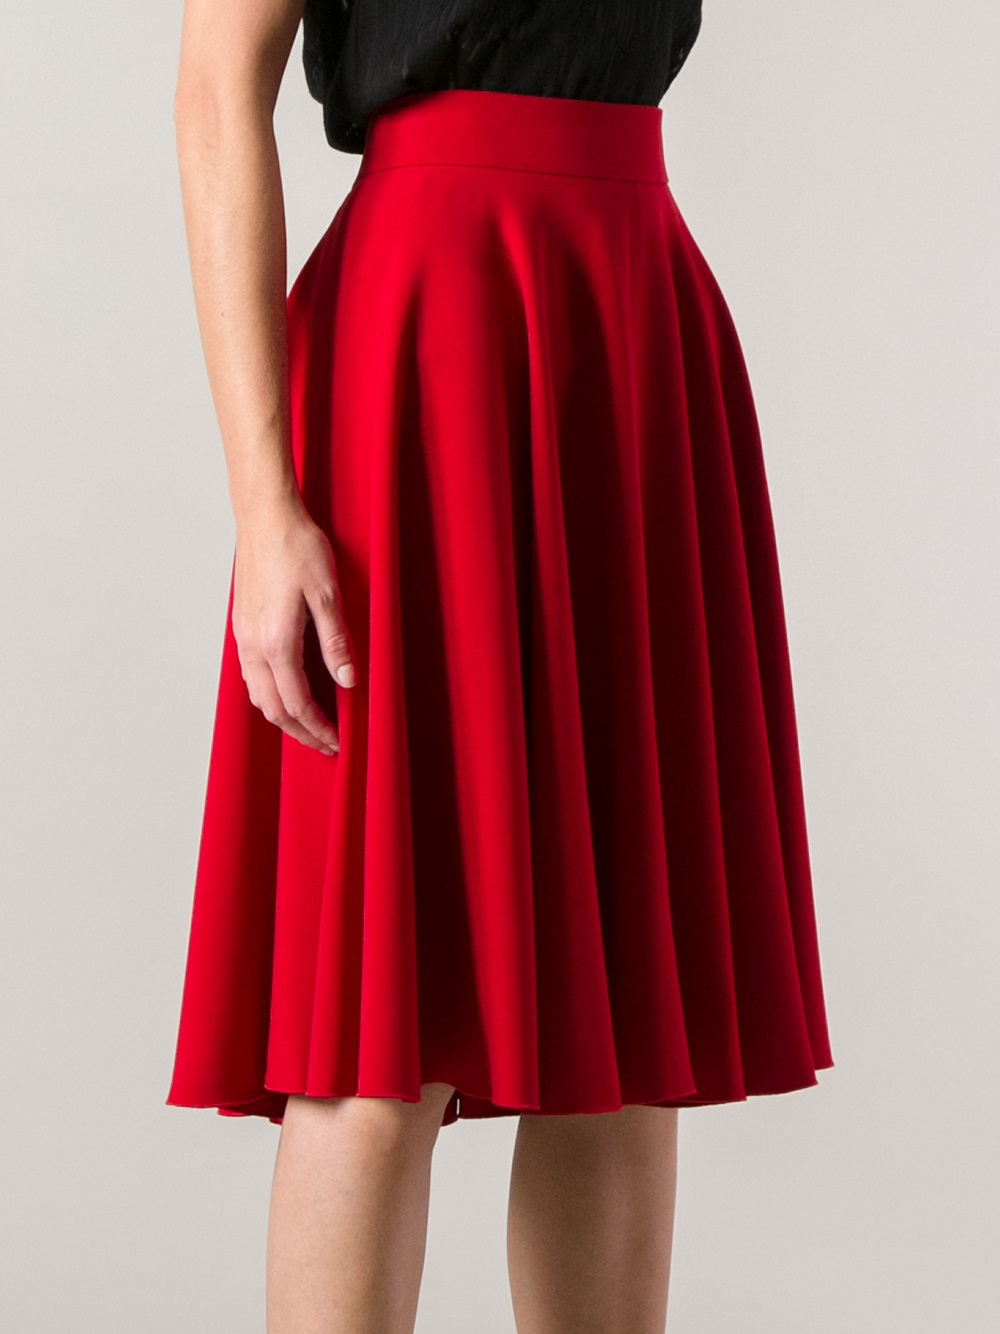 Dolce & Gabbana Pleated Skirt in Red - Lyst